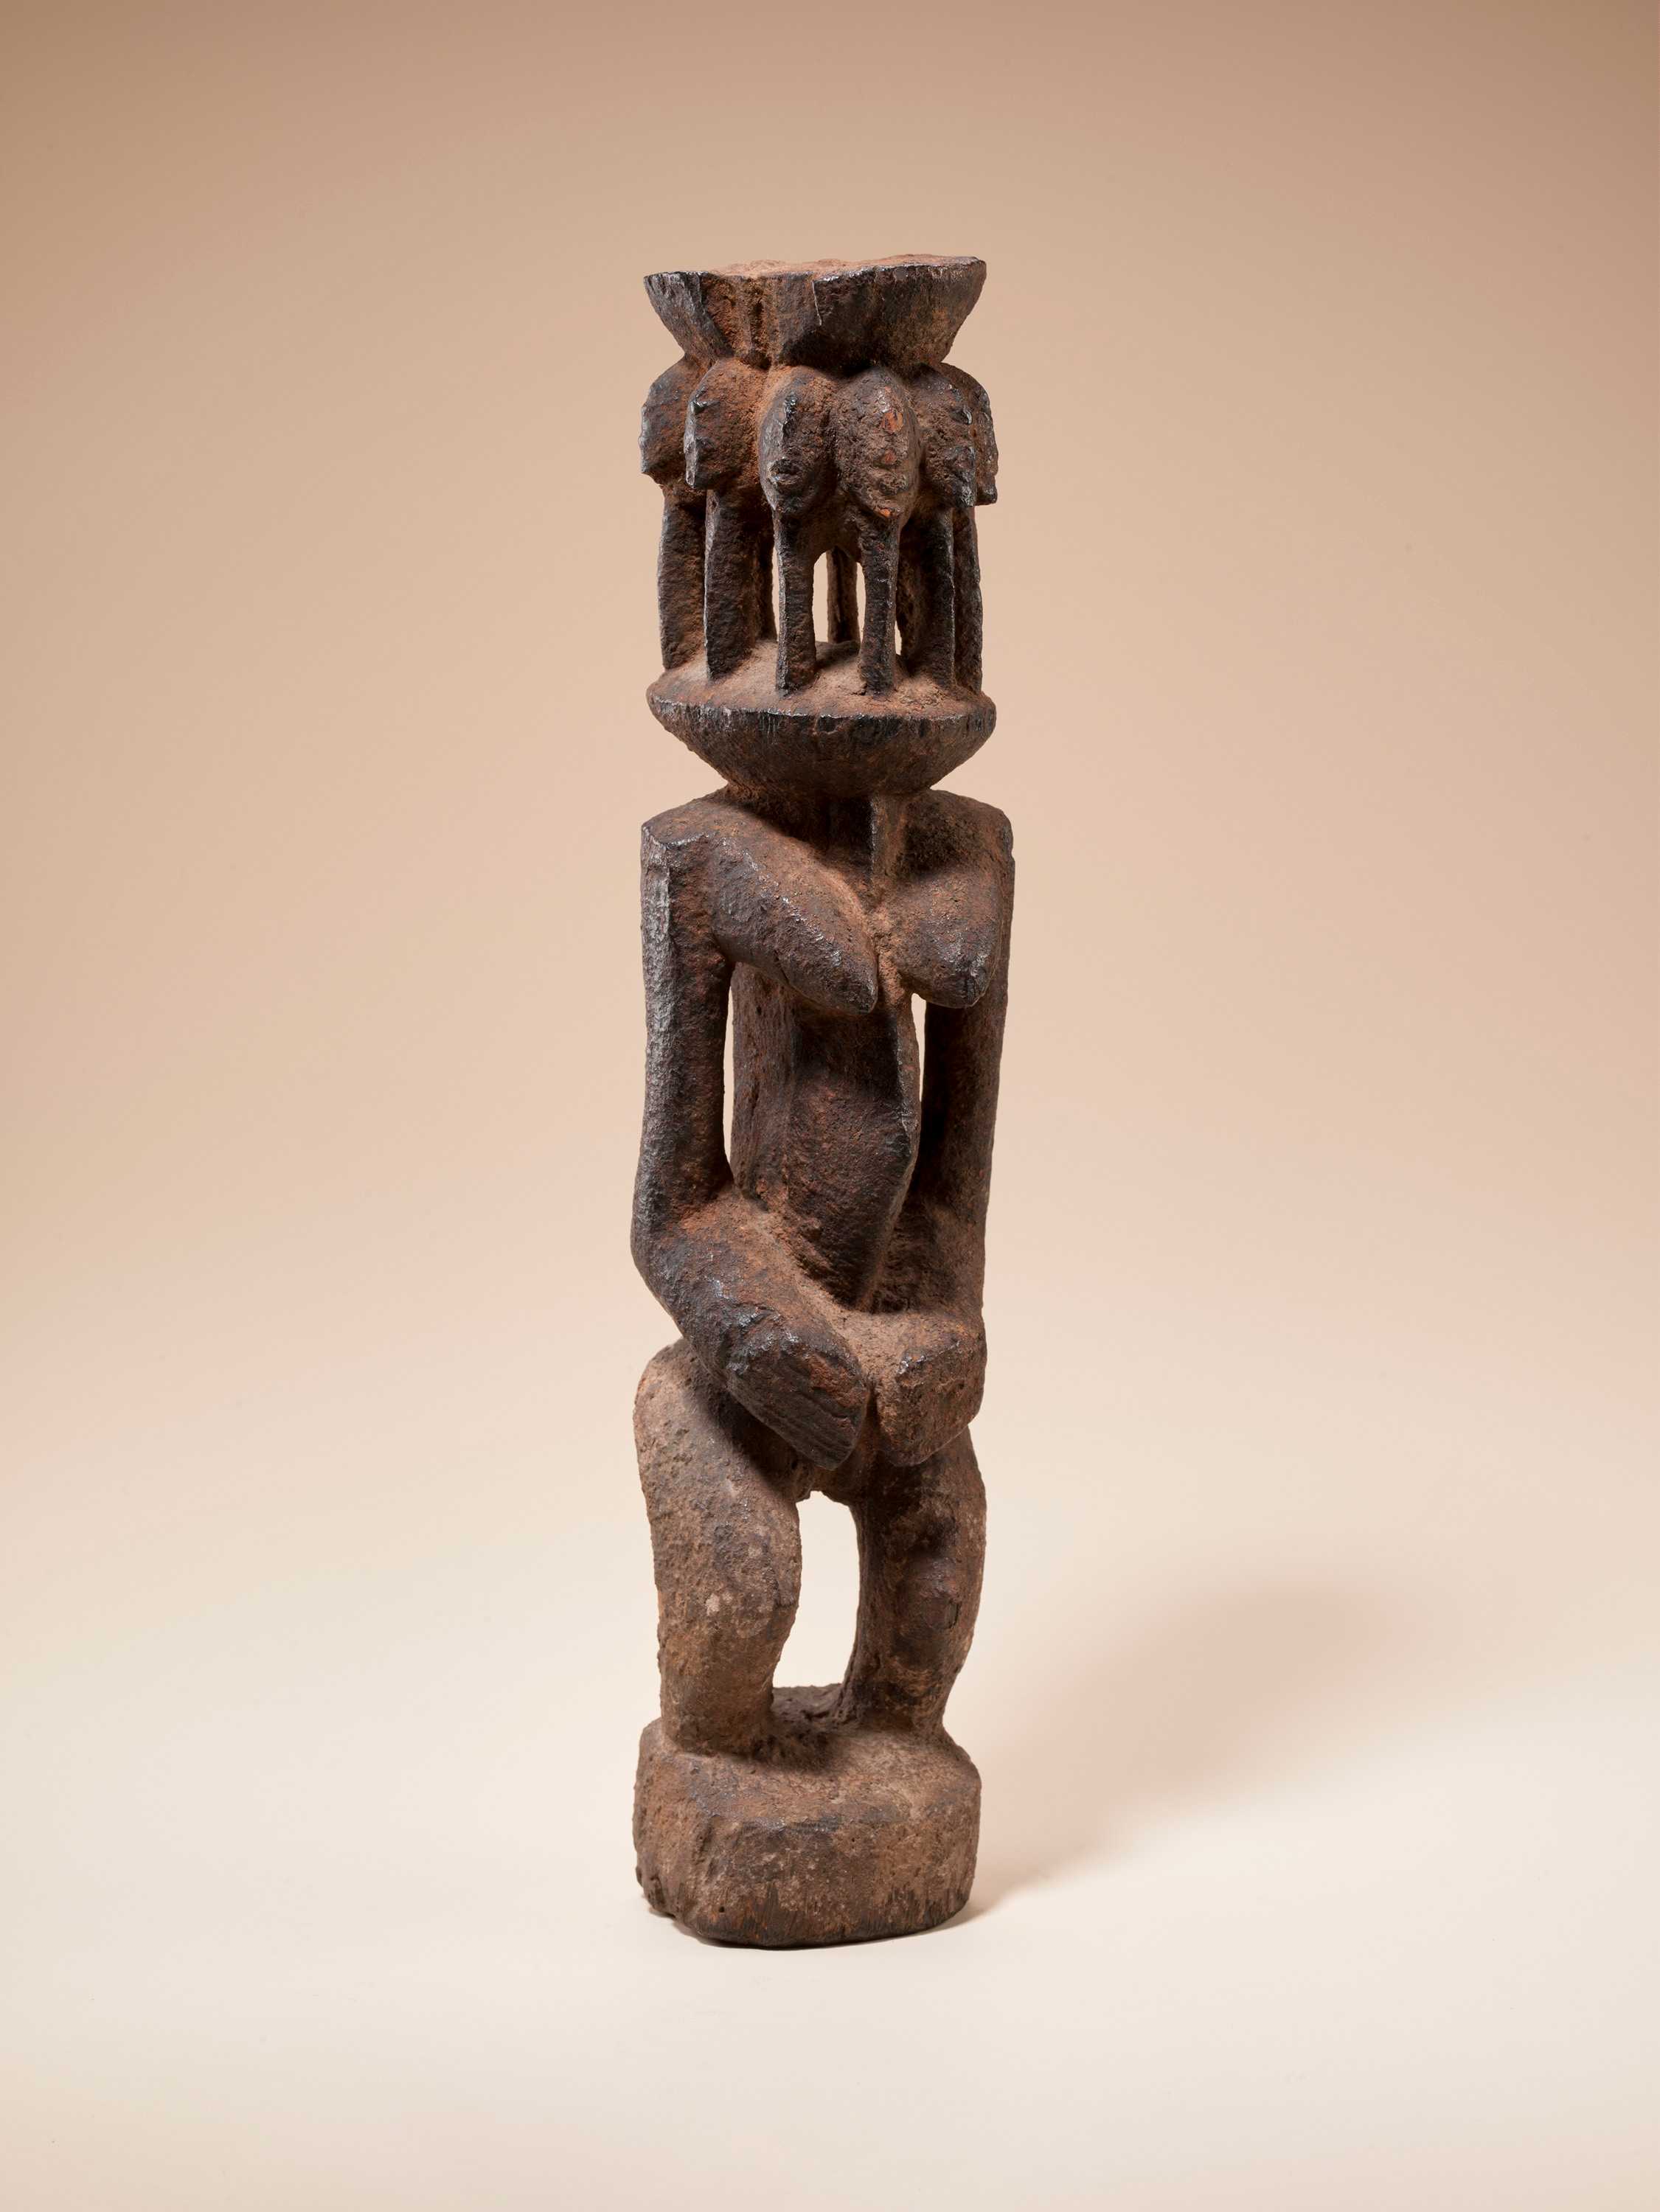 Small brown statue of a female figure with multiple heads